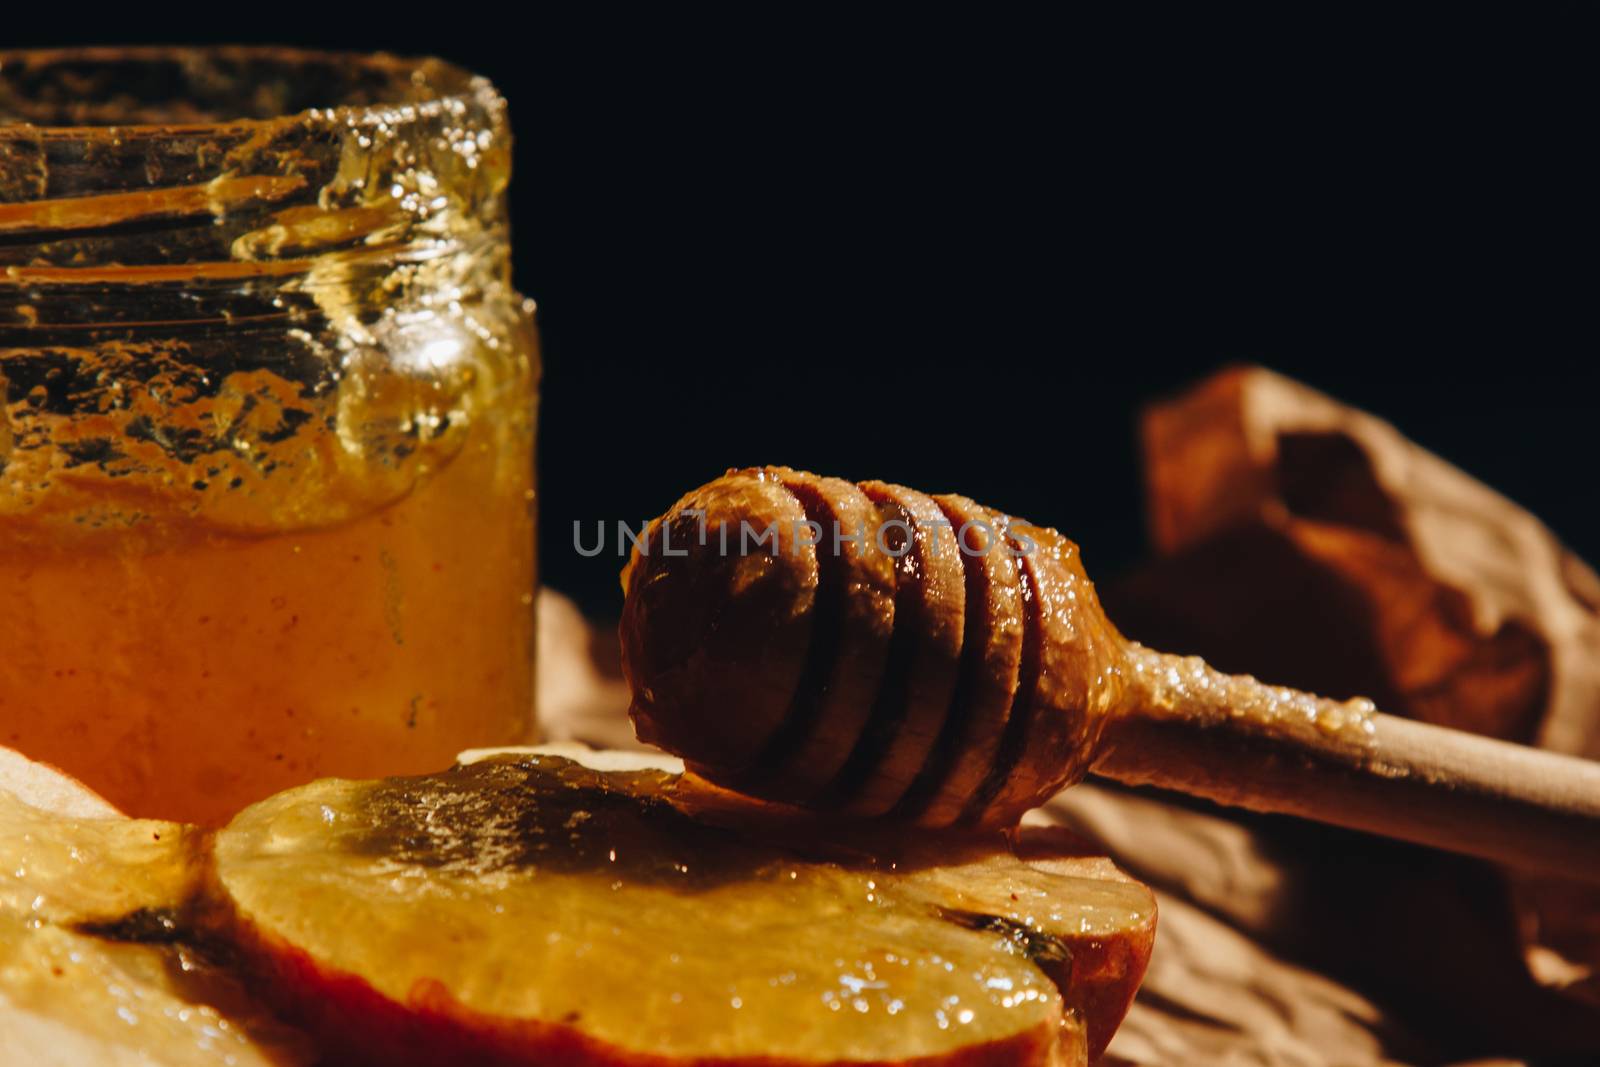 Honey with wooden honey dipper and fruits on wooden table close up